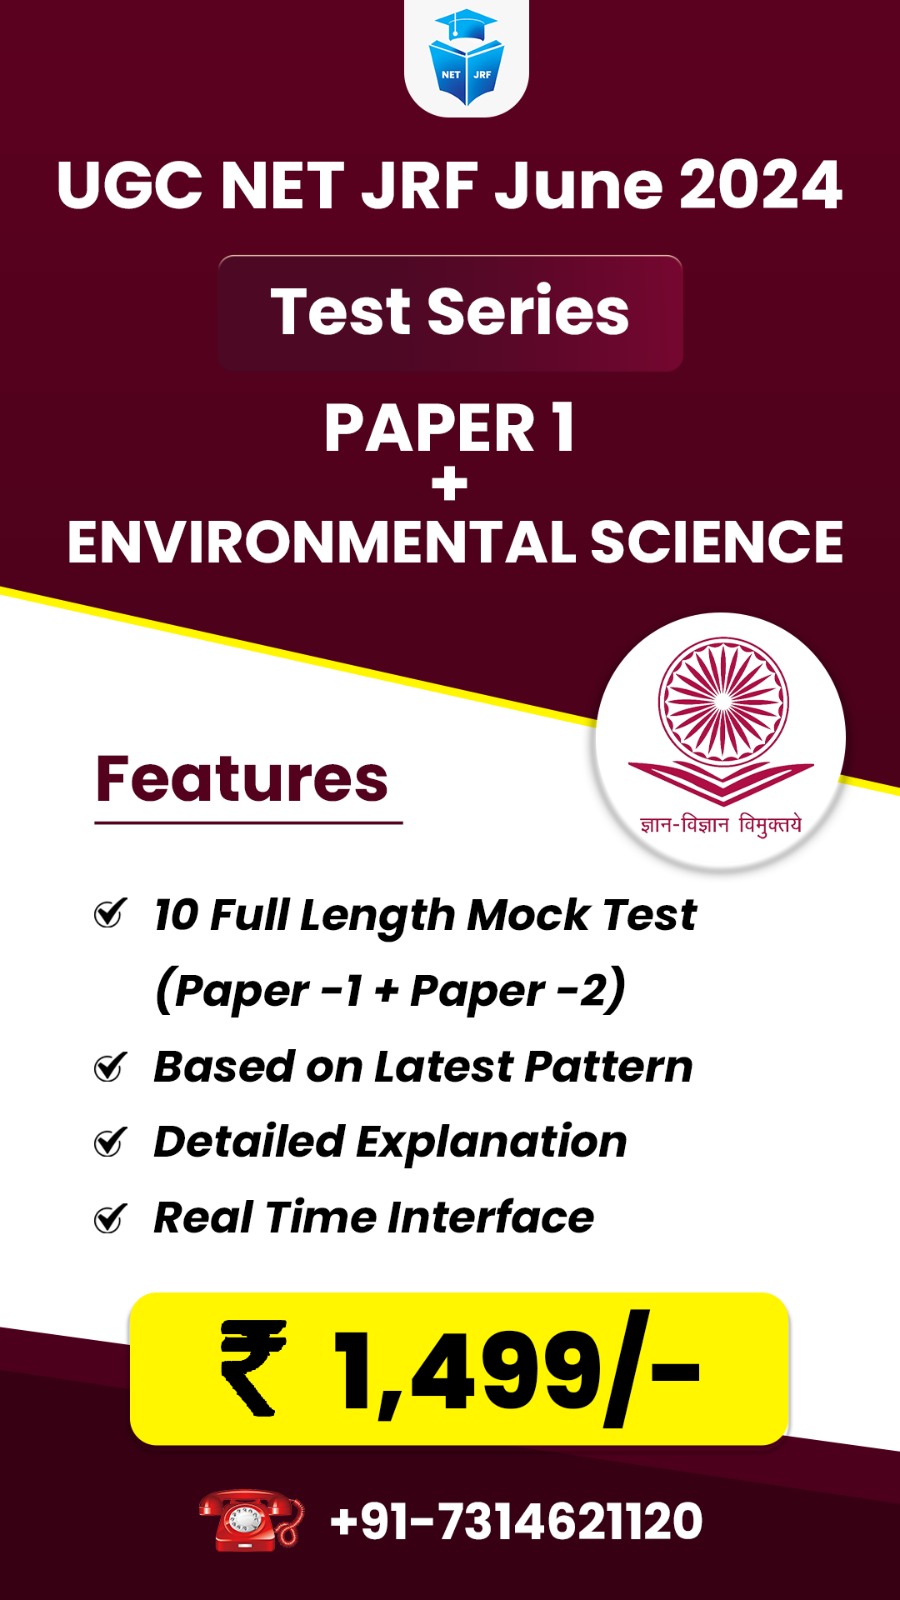 Environmental Science (Paper 1 + Paper 2) Test Series for June 2024